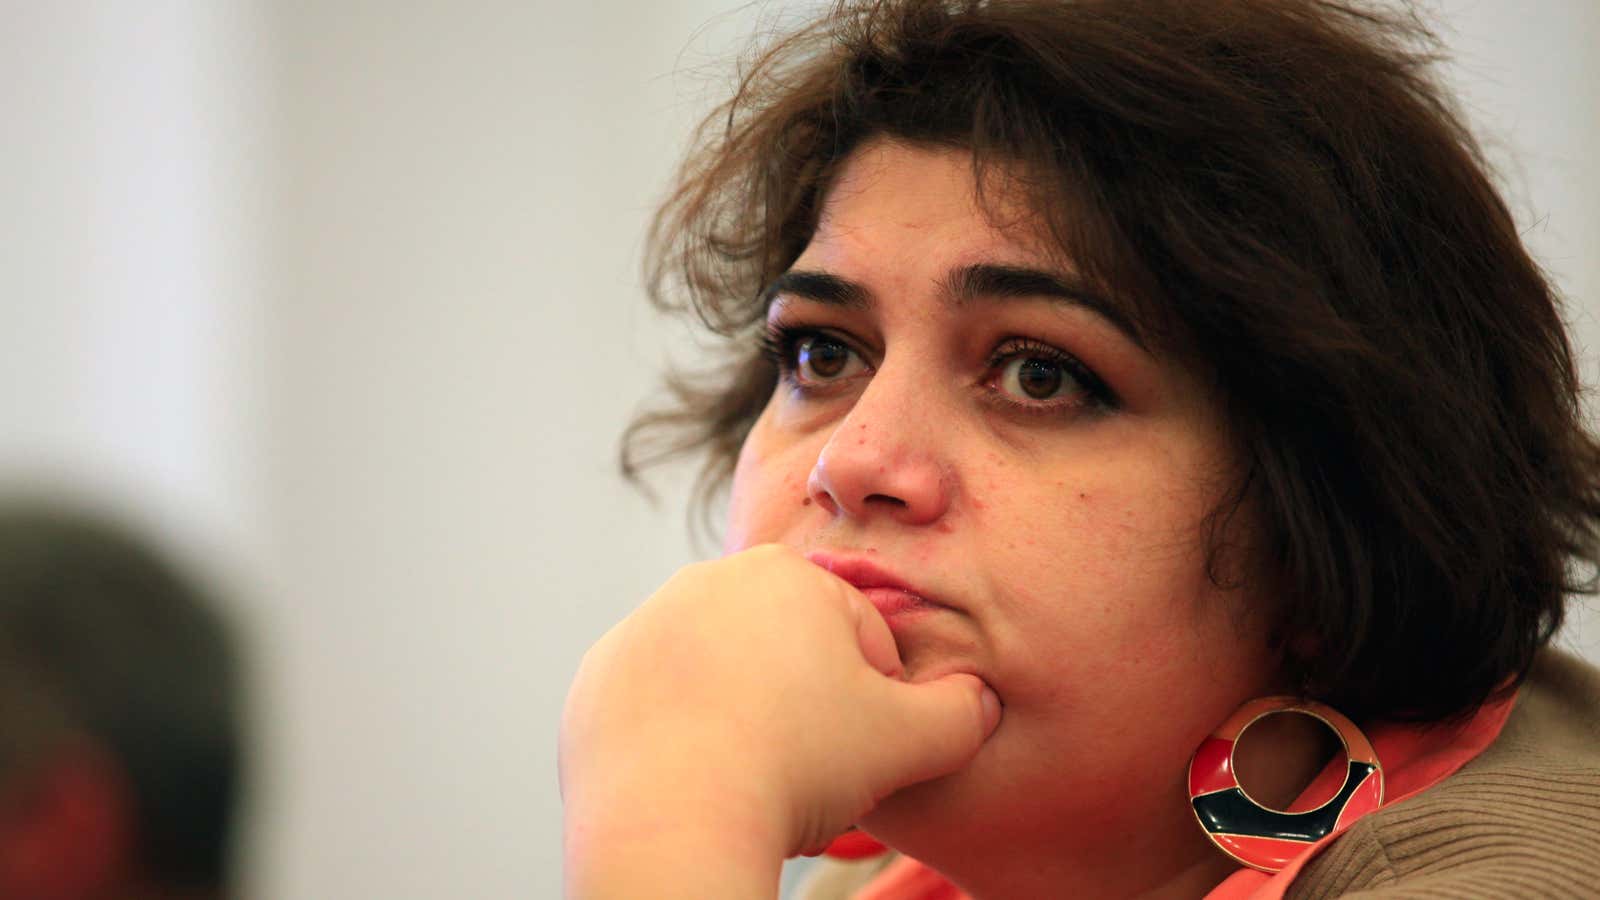 Azerbaijani journalist Khadija Ismayilova was arrested in 2014 for investigating allegations of corruption against the president’s family.